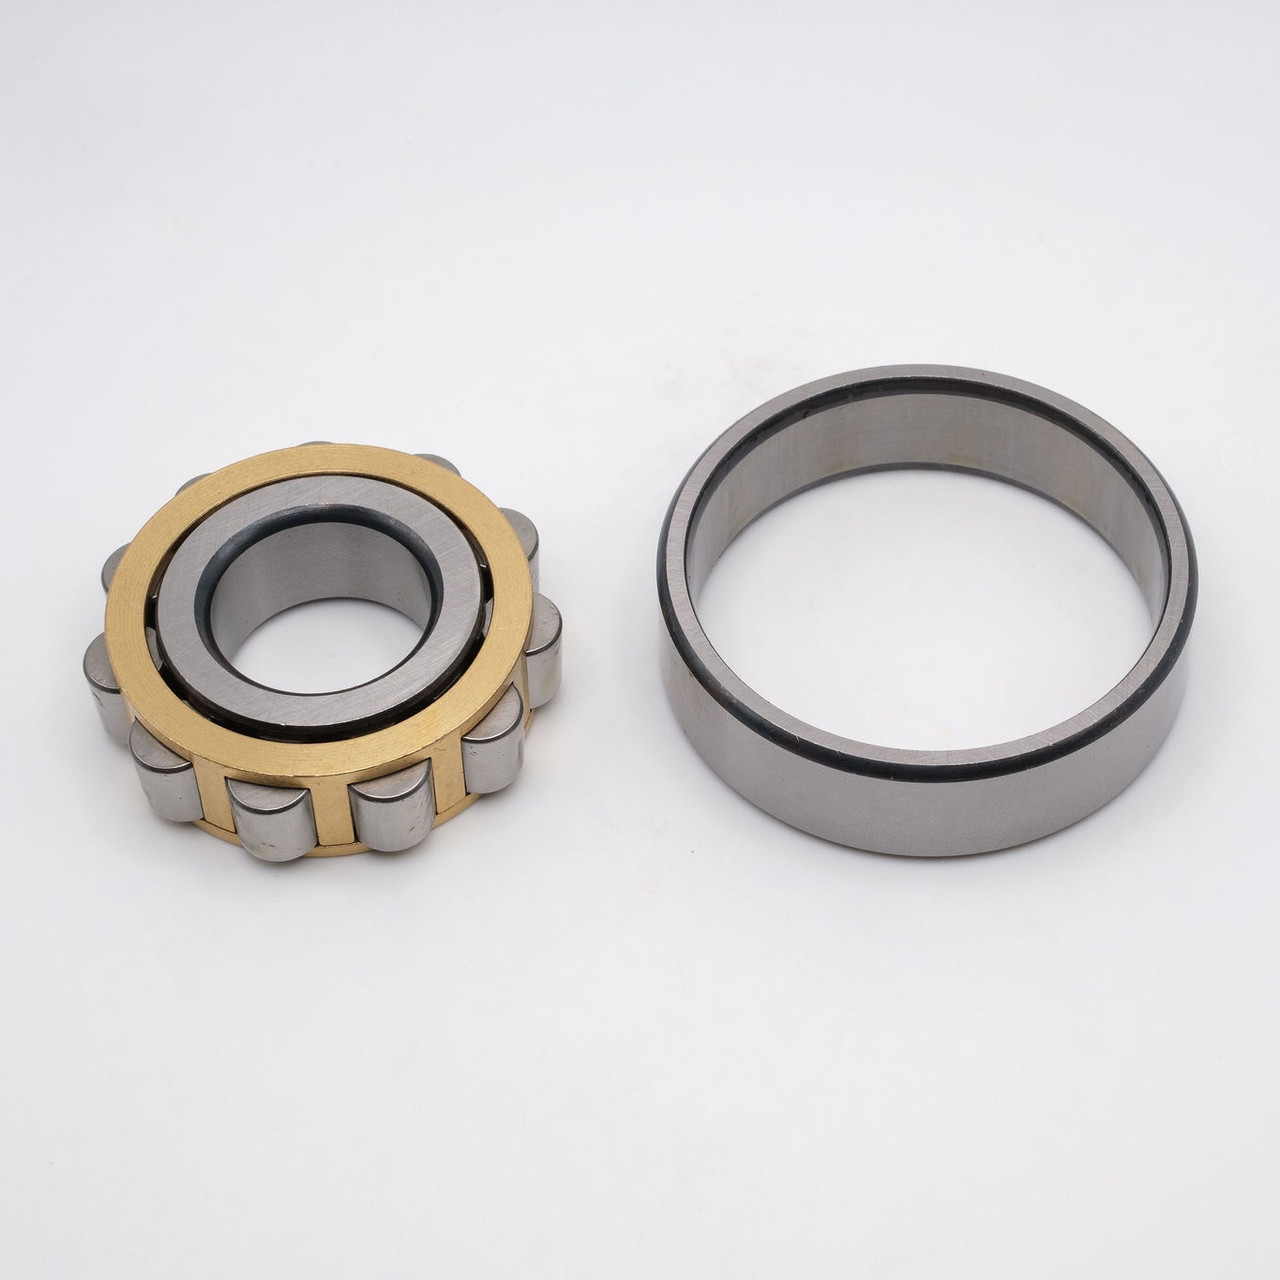 NU209EM Cylindrical Roller Bearing Brass Cage 45x85x19 Separated View